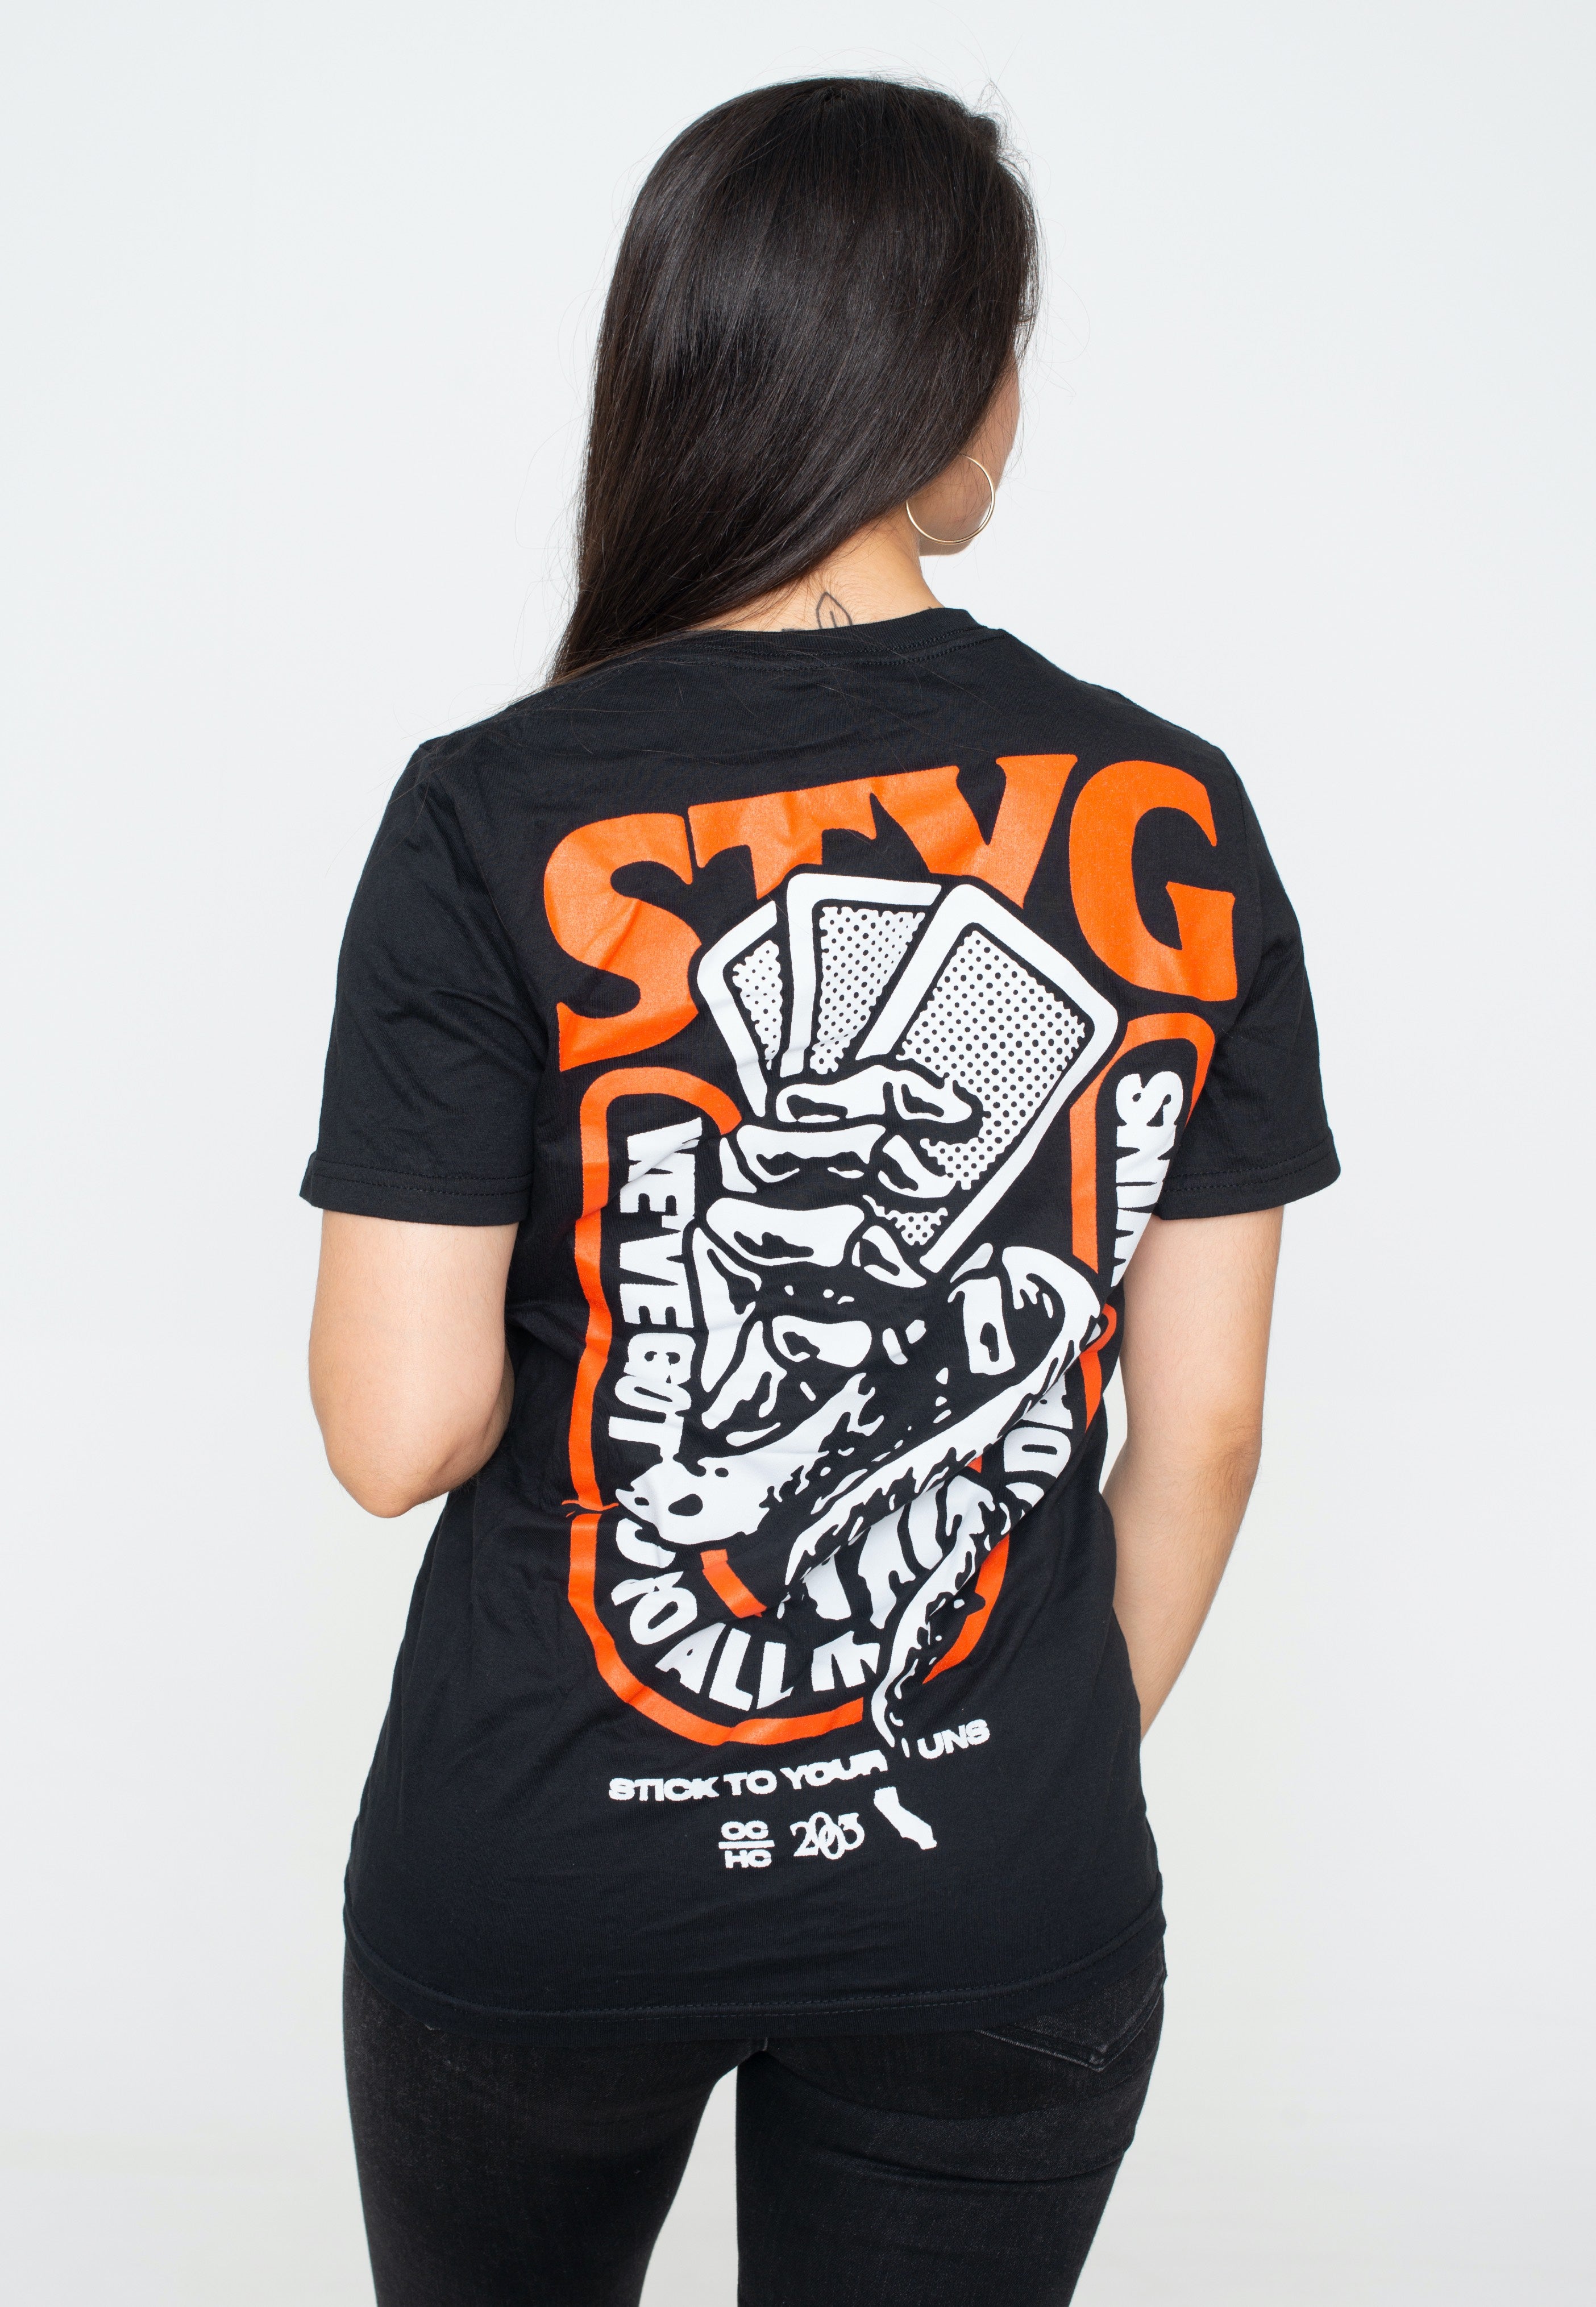 Stick To Your Guns - Go All In - T-Shirt | Women-Image